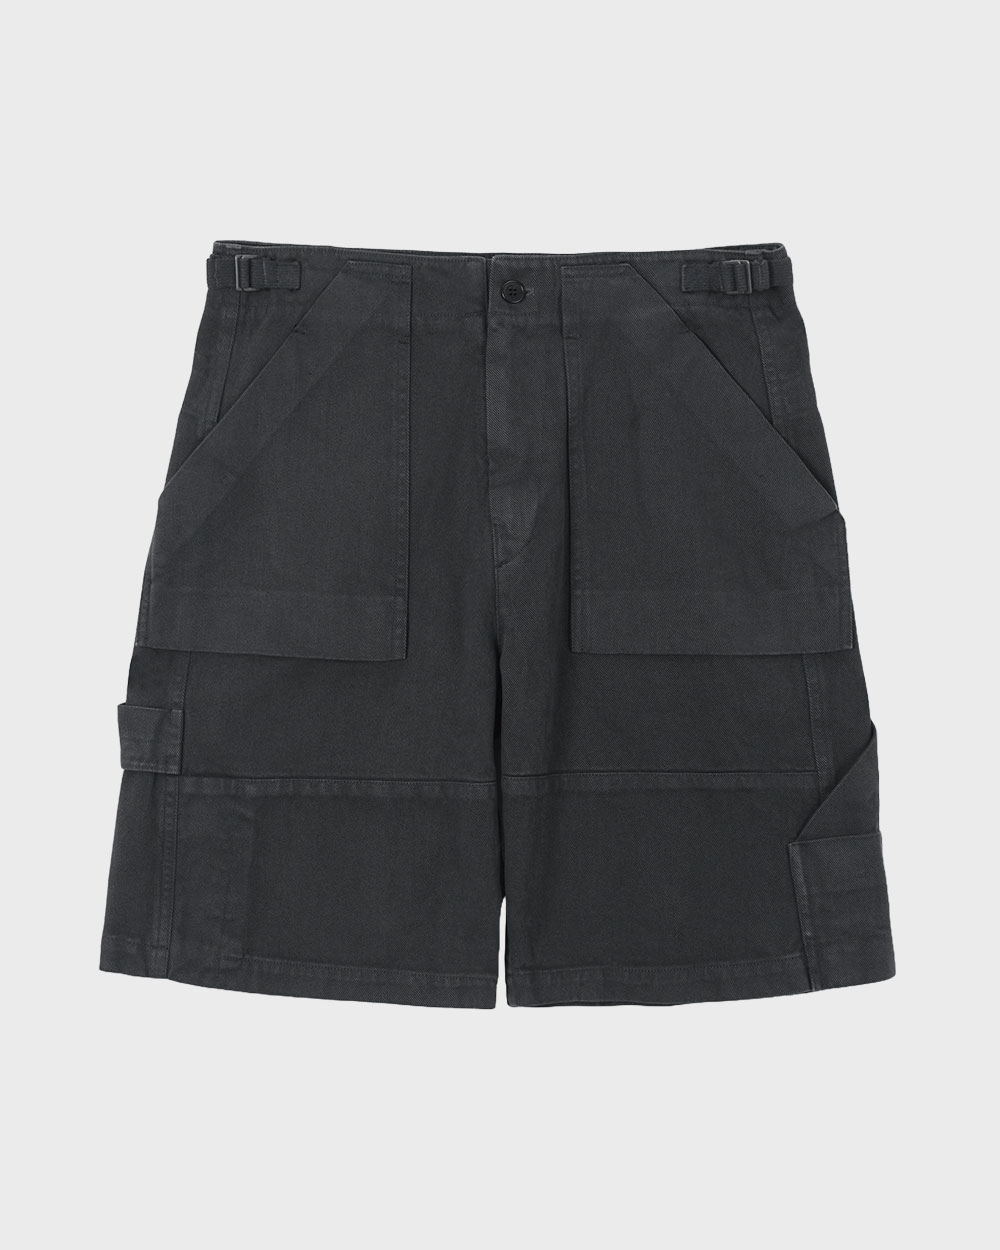 Garments Dyed Workshorts (Charcoal)